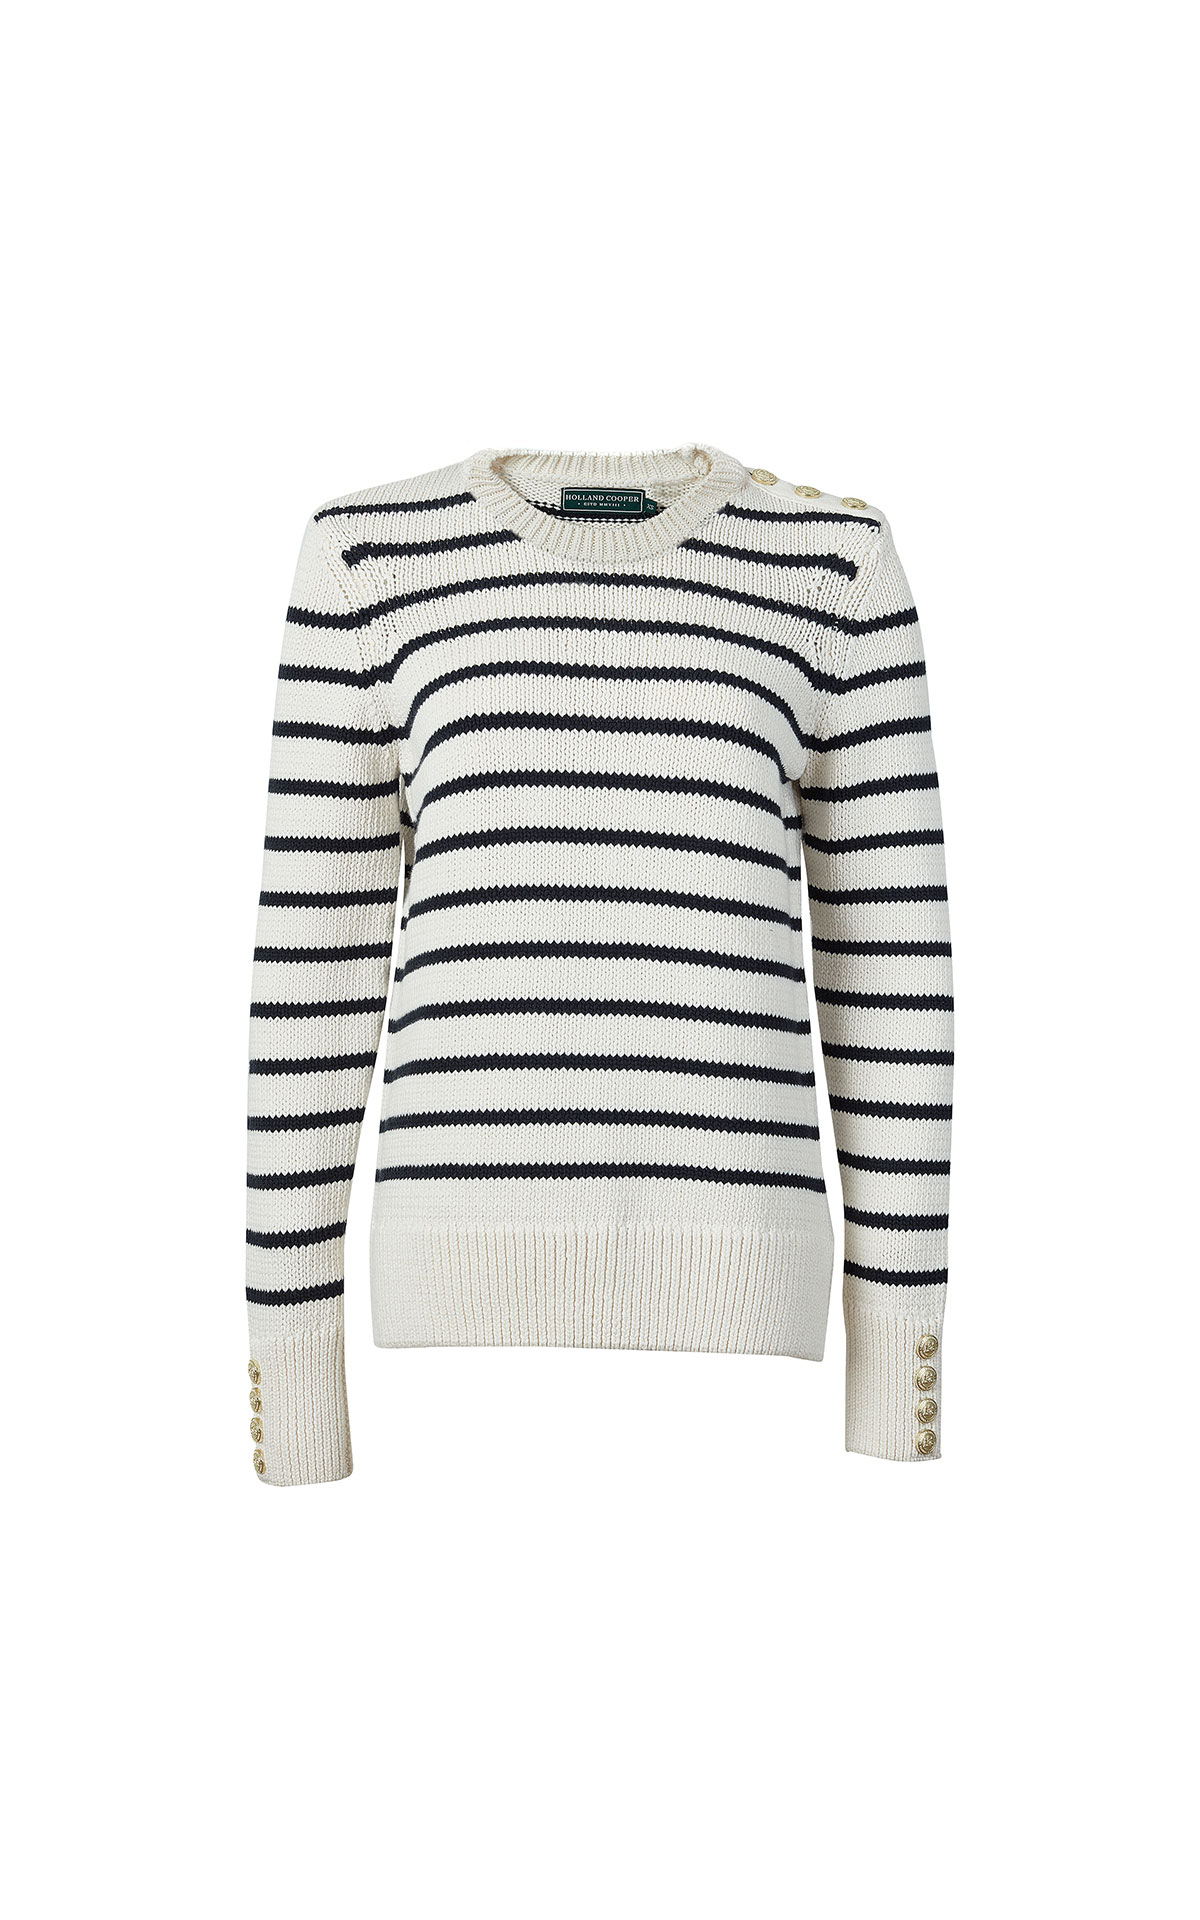 Holland Cooper Henley striped crew from Bicester Village